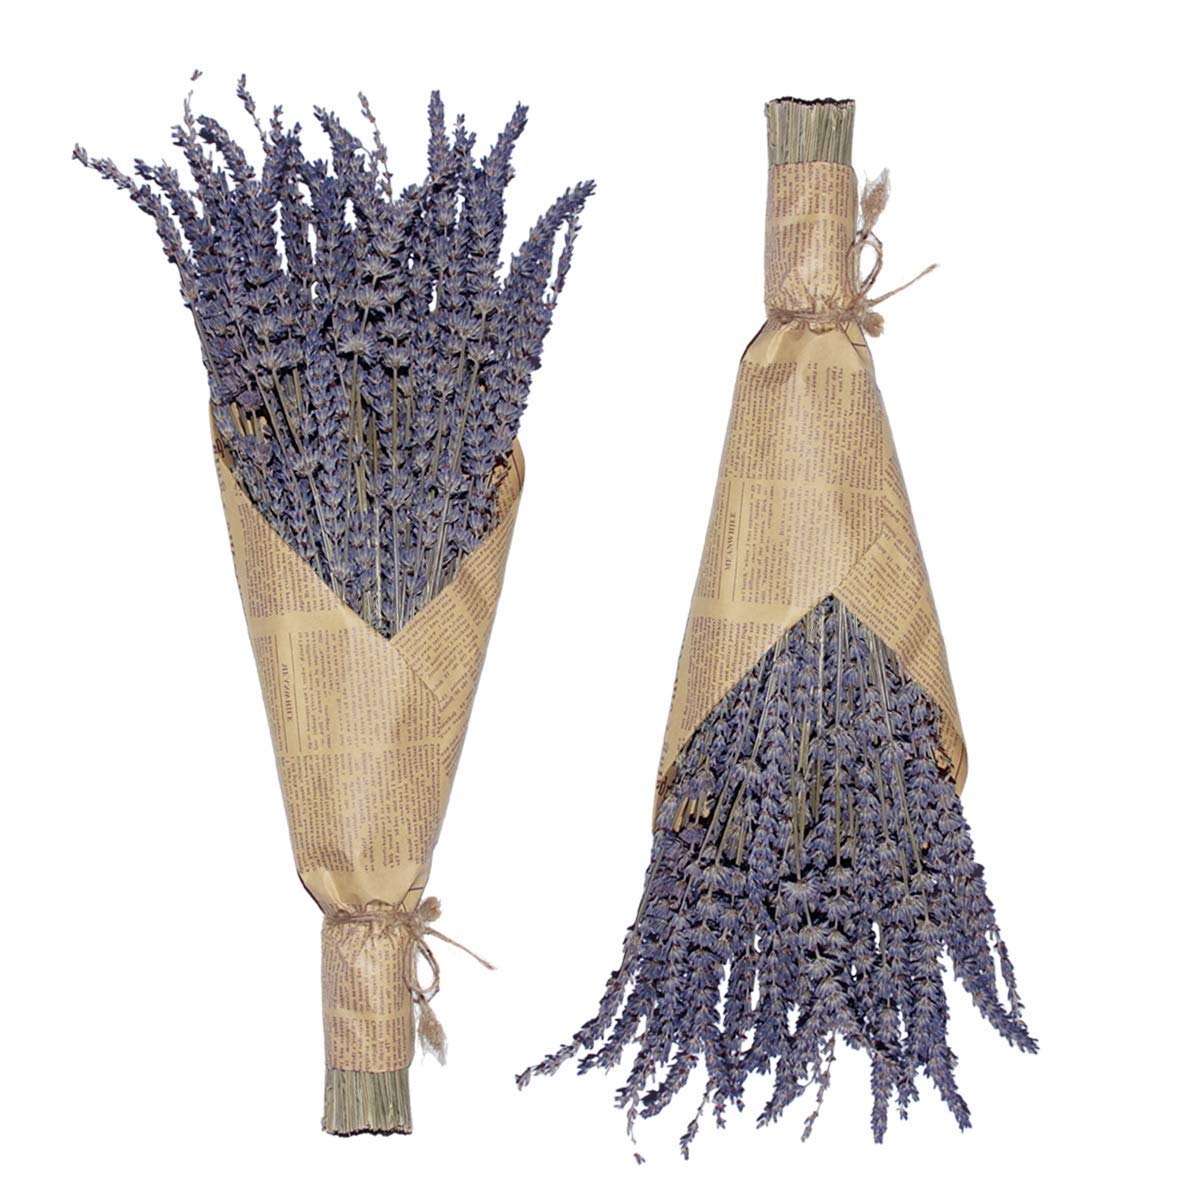 Dried Lavender Flowers - One Bunch